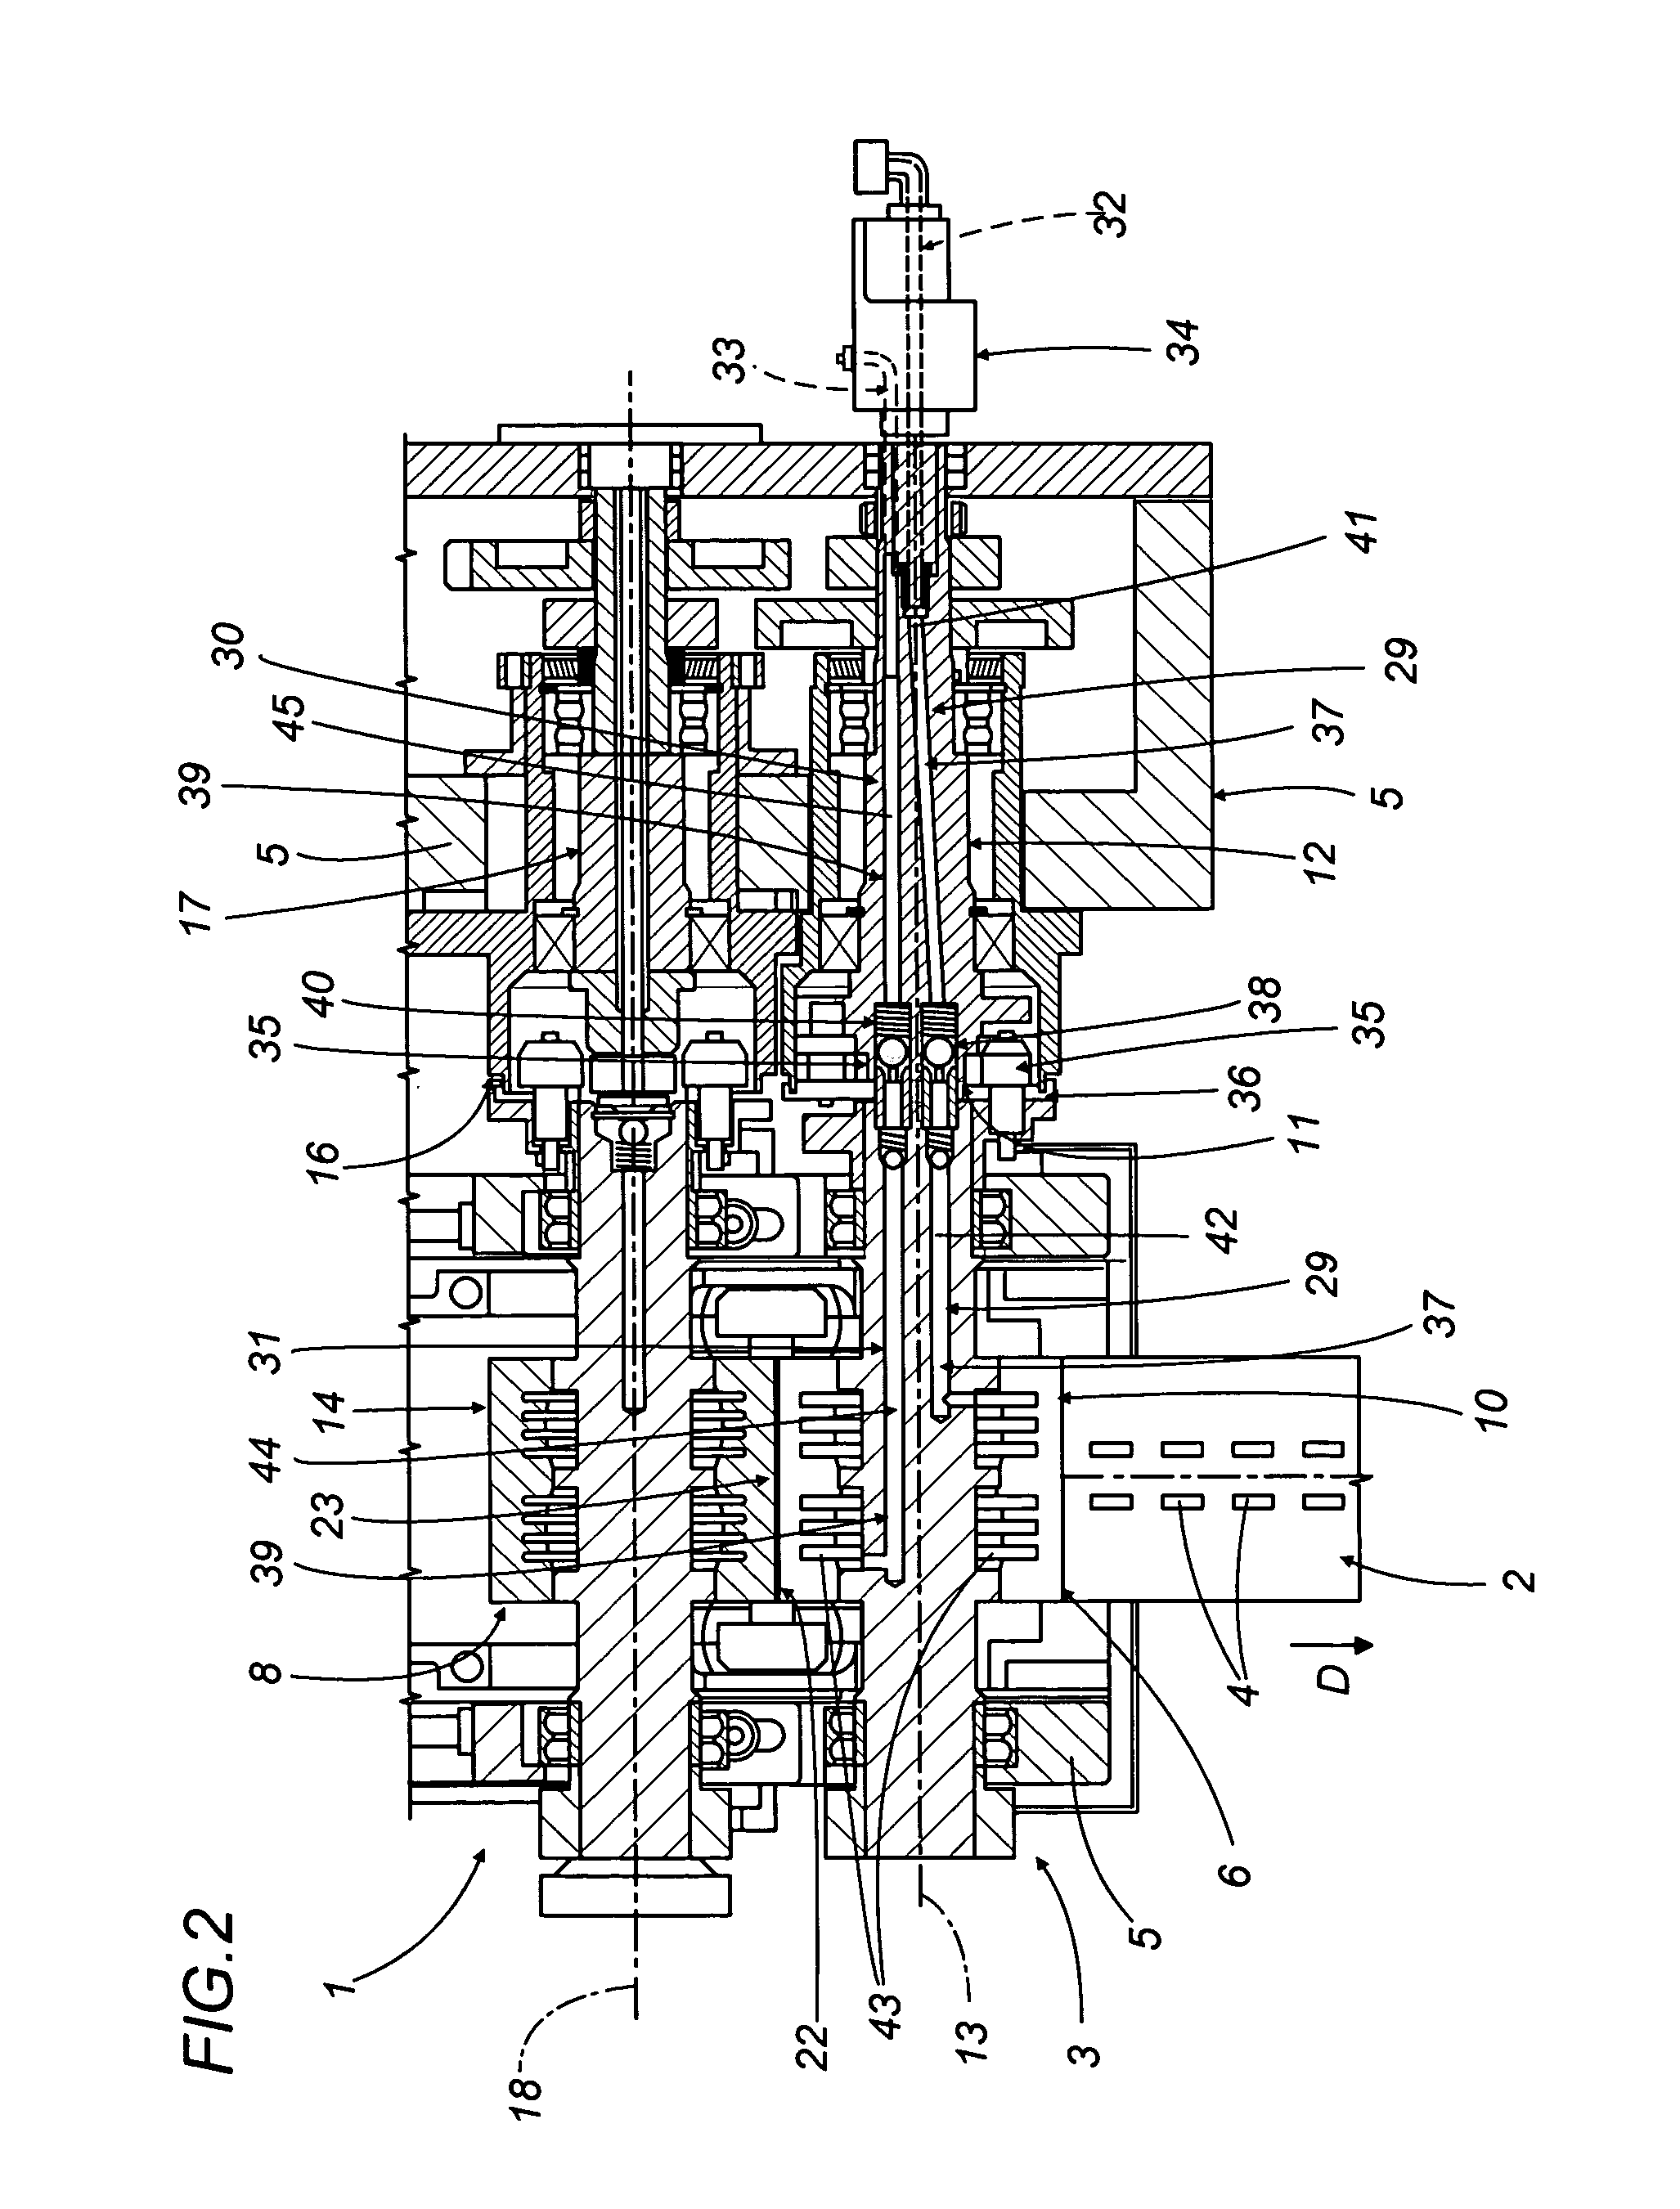 Feed unit for strip wrapping material